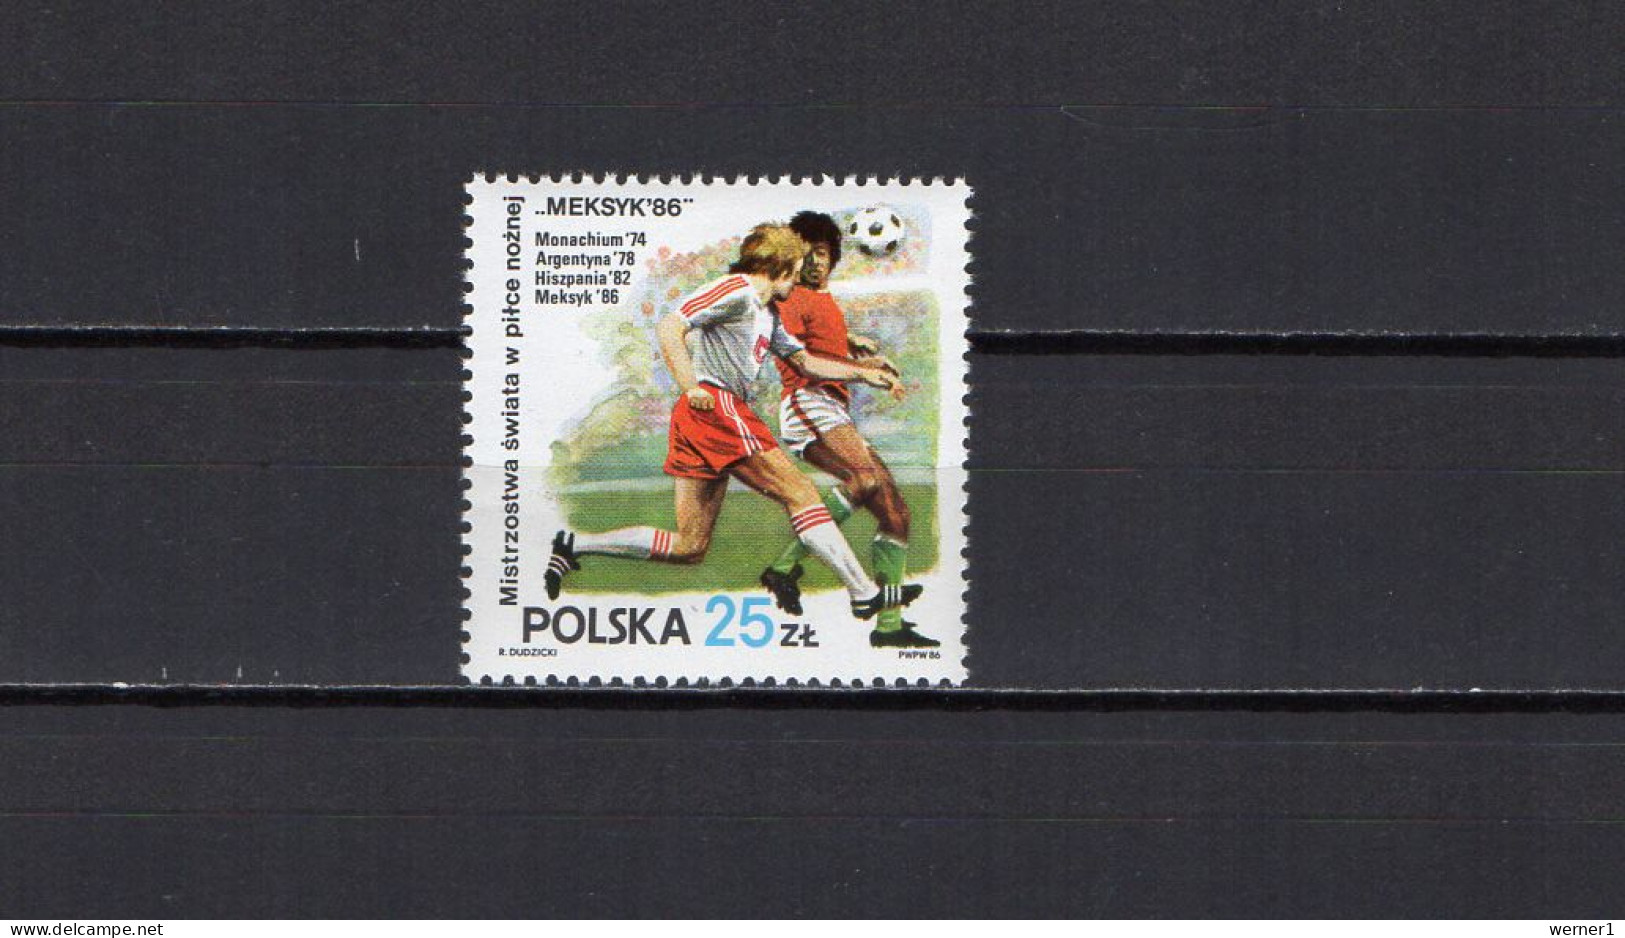 Poland 1986 Football Soccer World Cup Stamp MNH - 1986 – Messico